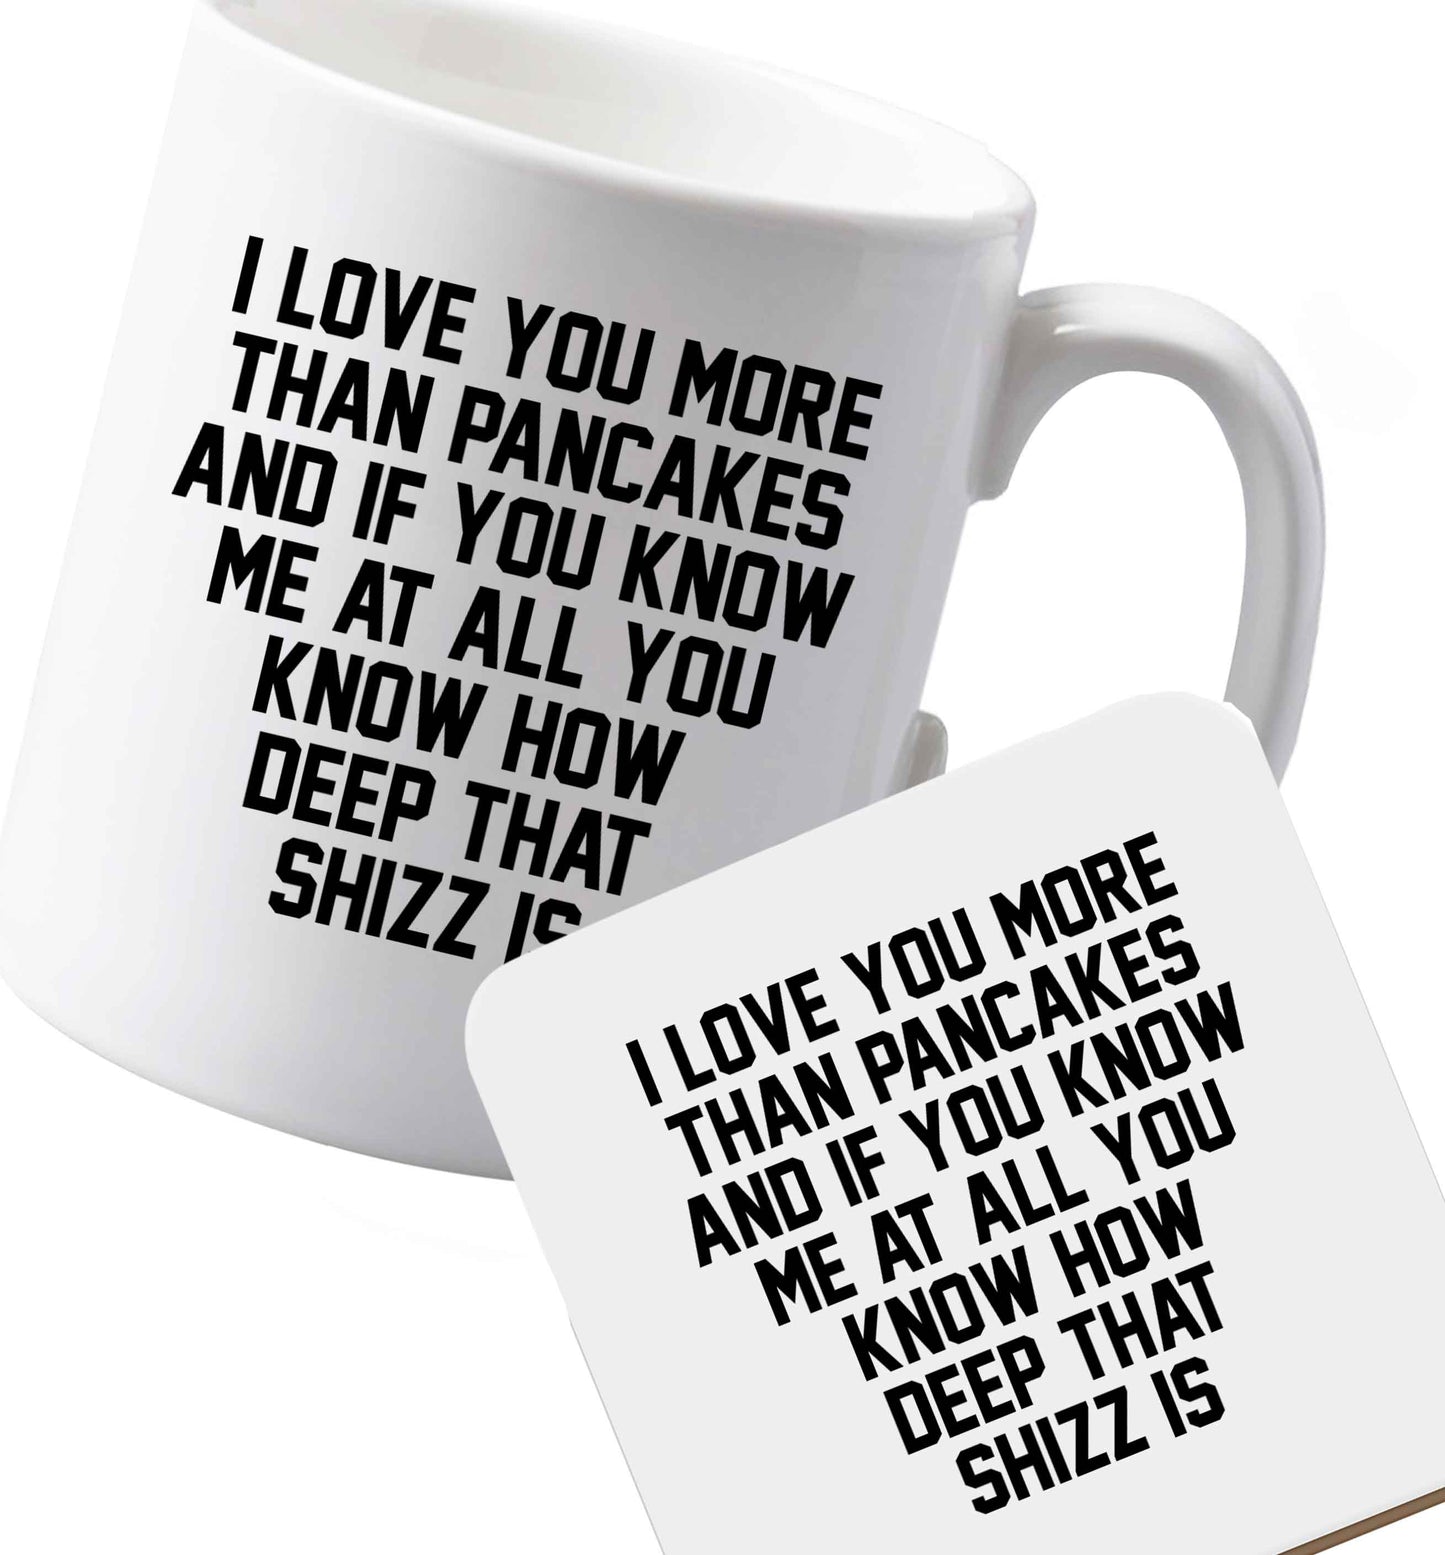 10 oz Ceramic mug and coaster I love you more than pancakes and if you know me at all you know how deep that shizz is both sides